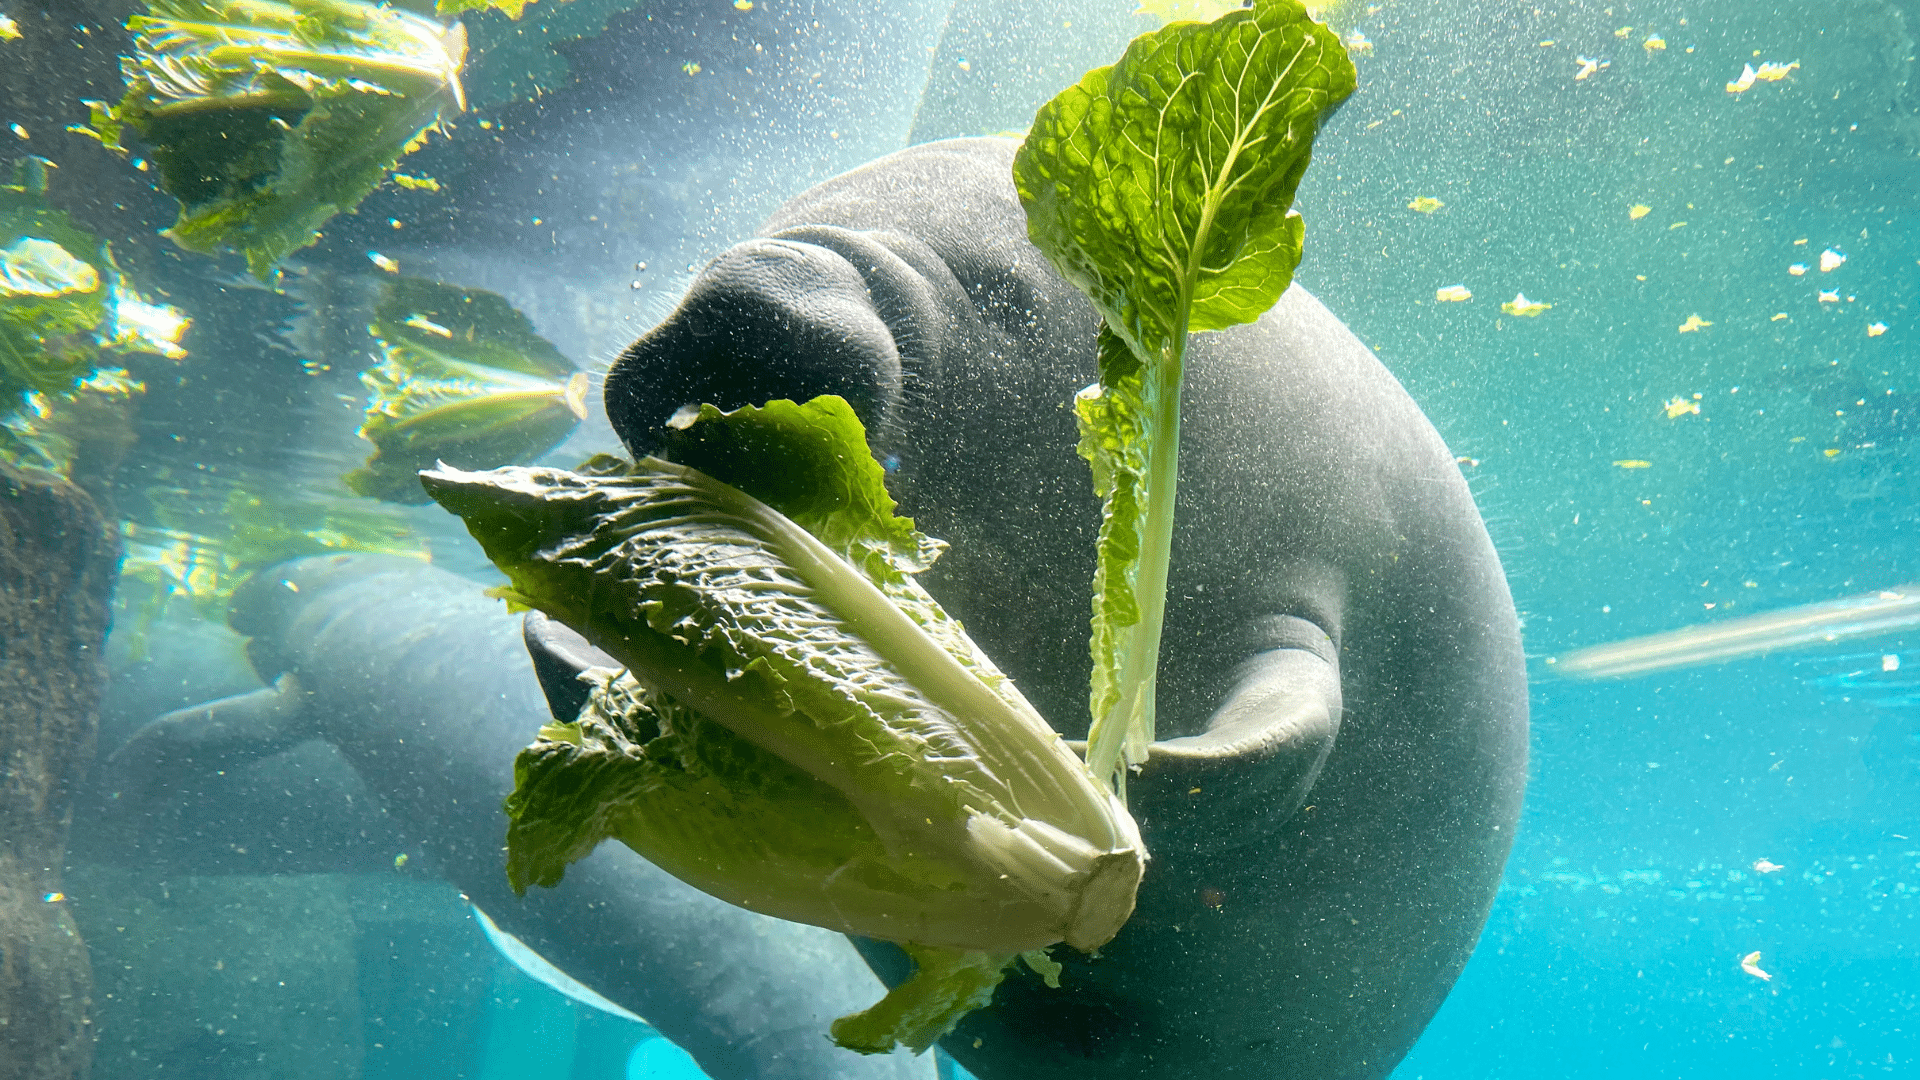 Year of the Manatee: Swimming with gentle giants in Crystal River, Florida